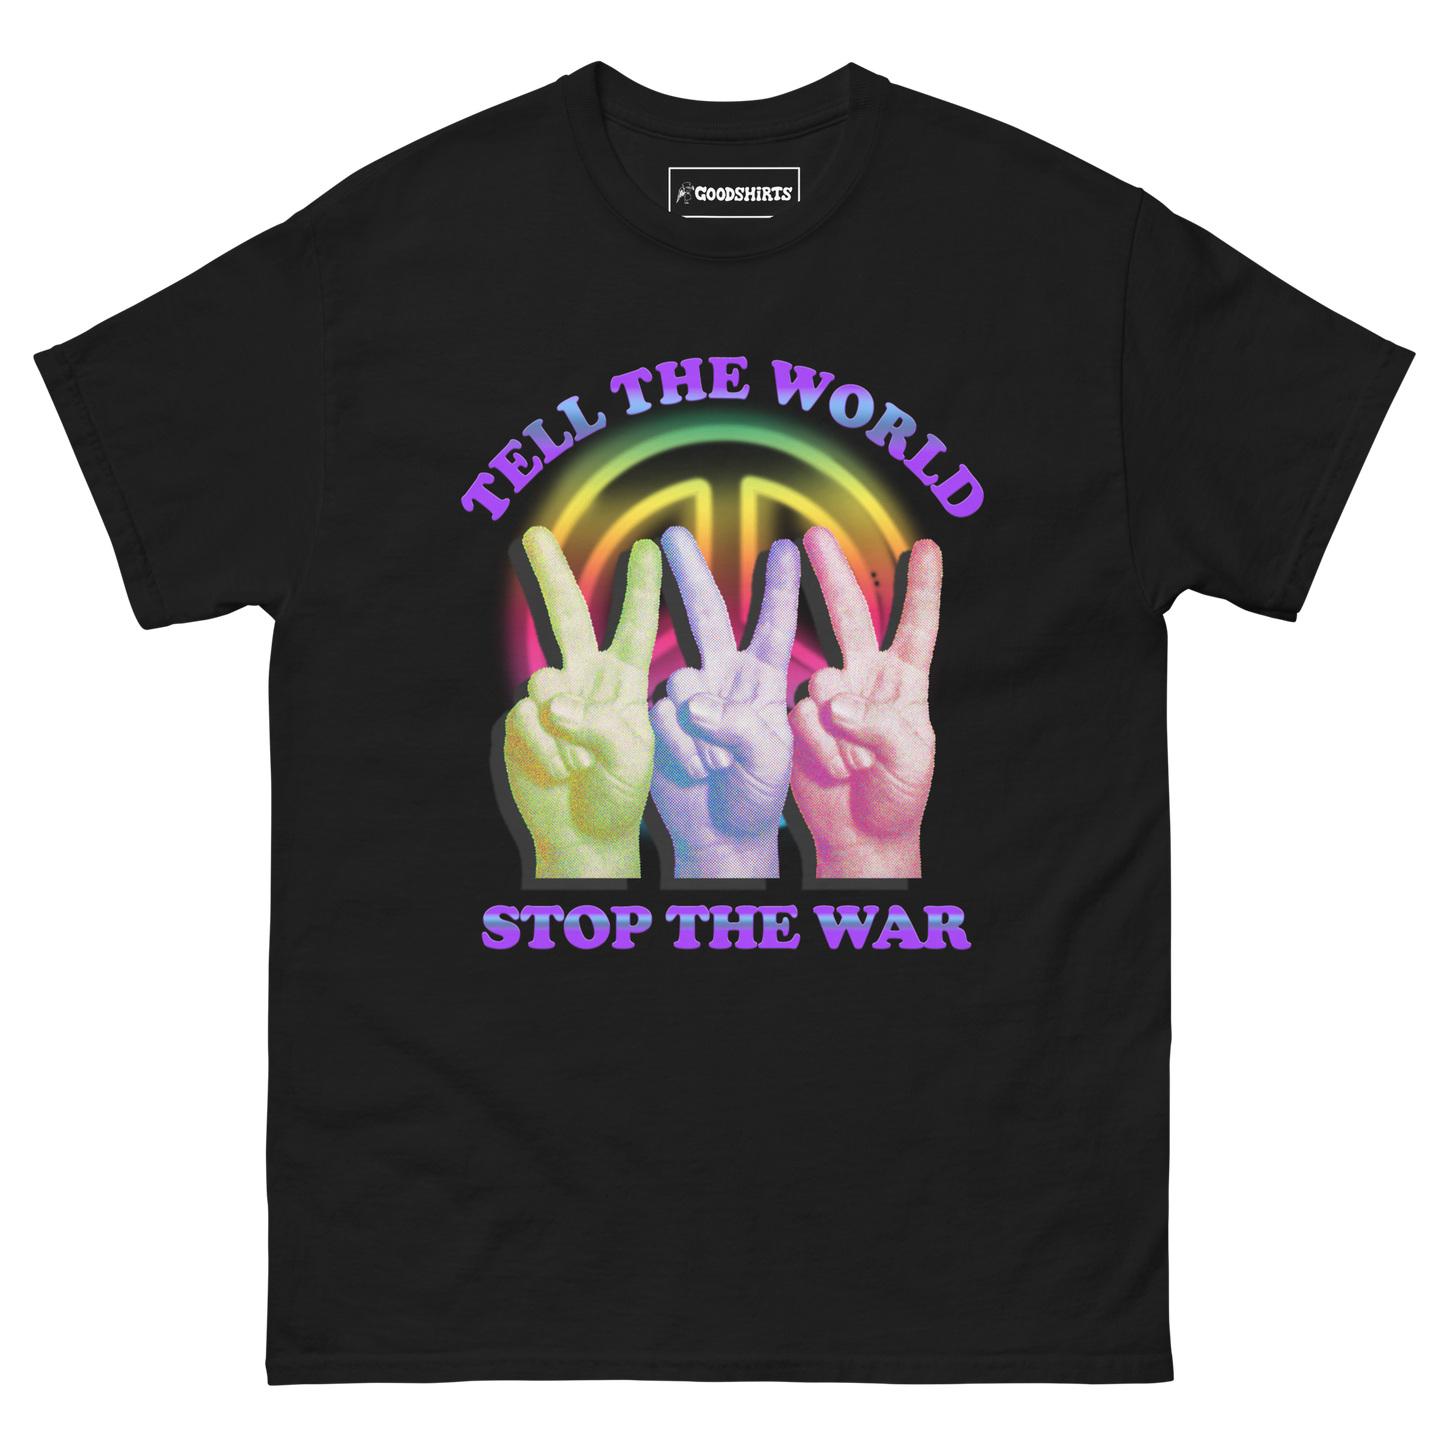 Tell The World Stop The War.